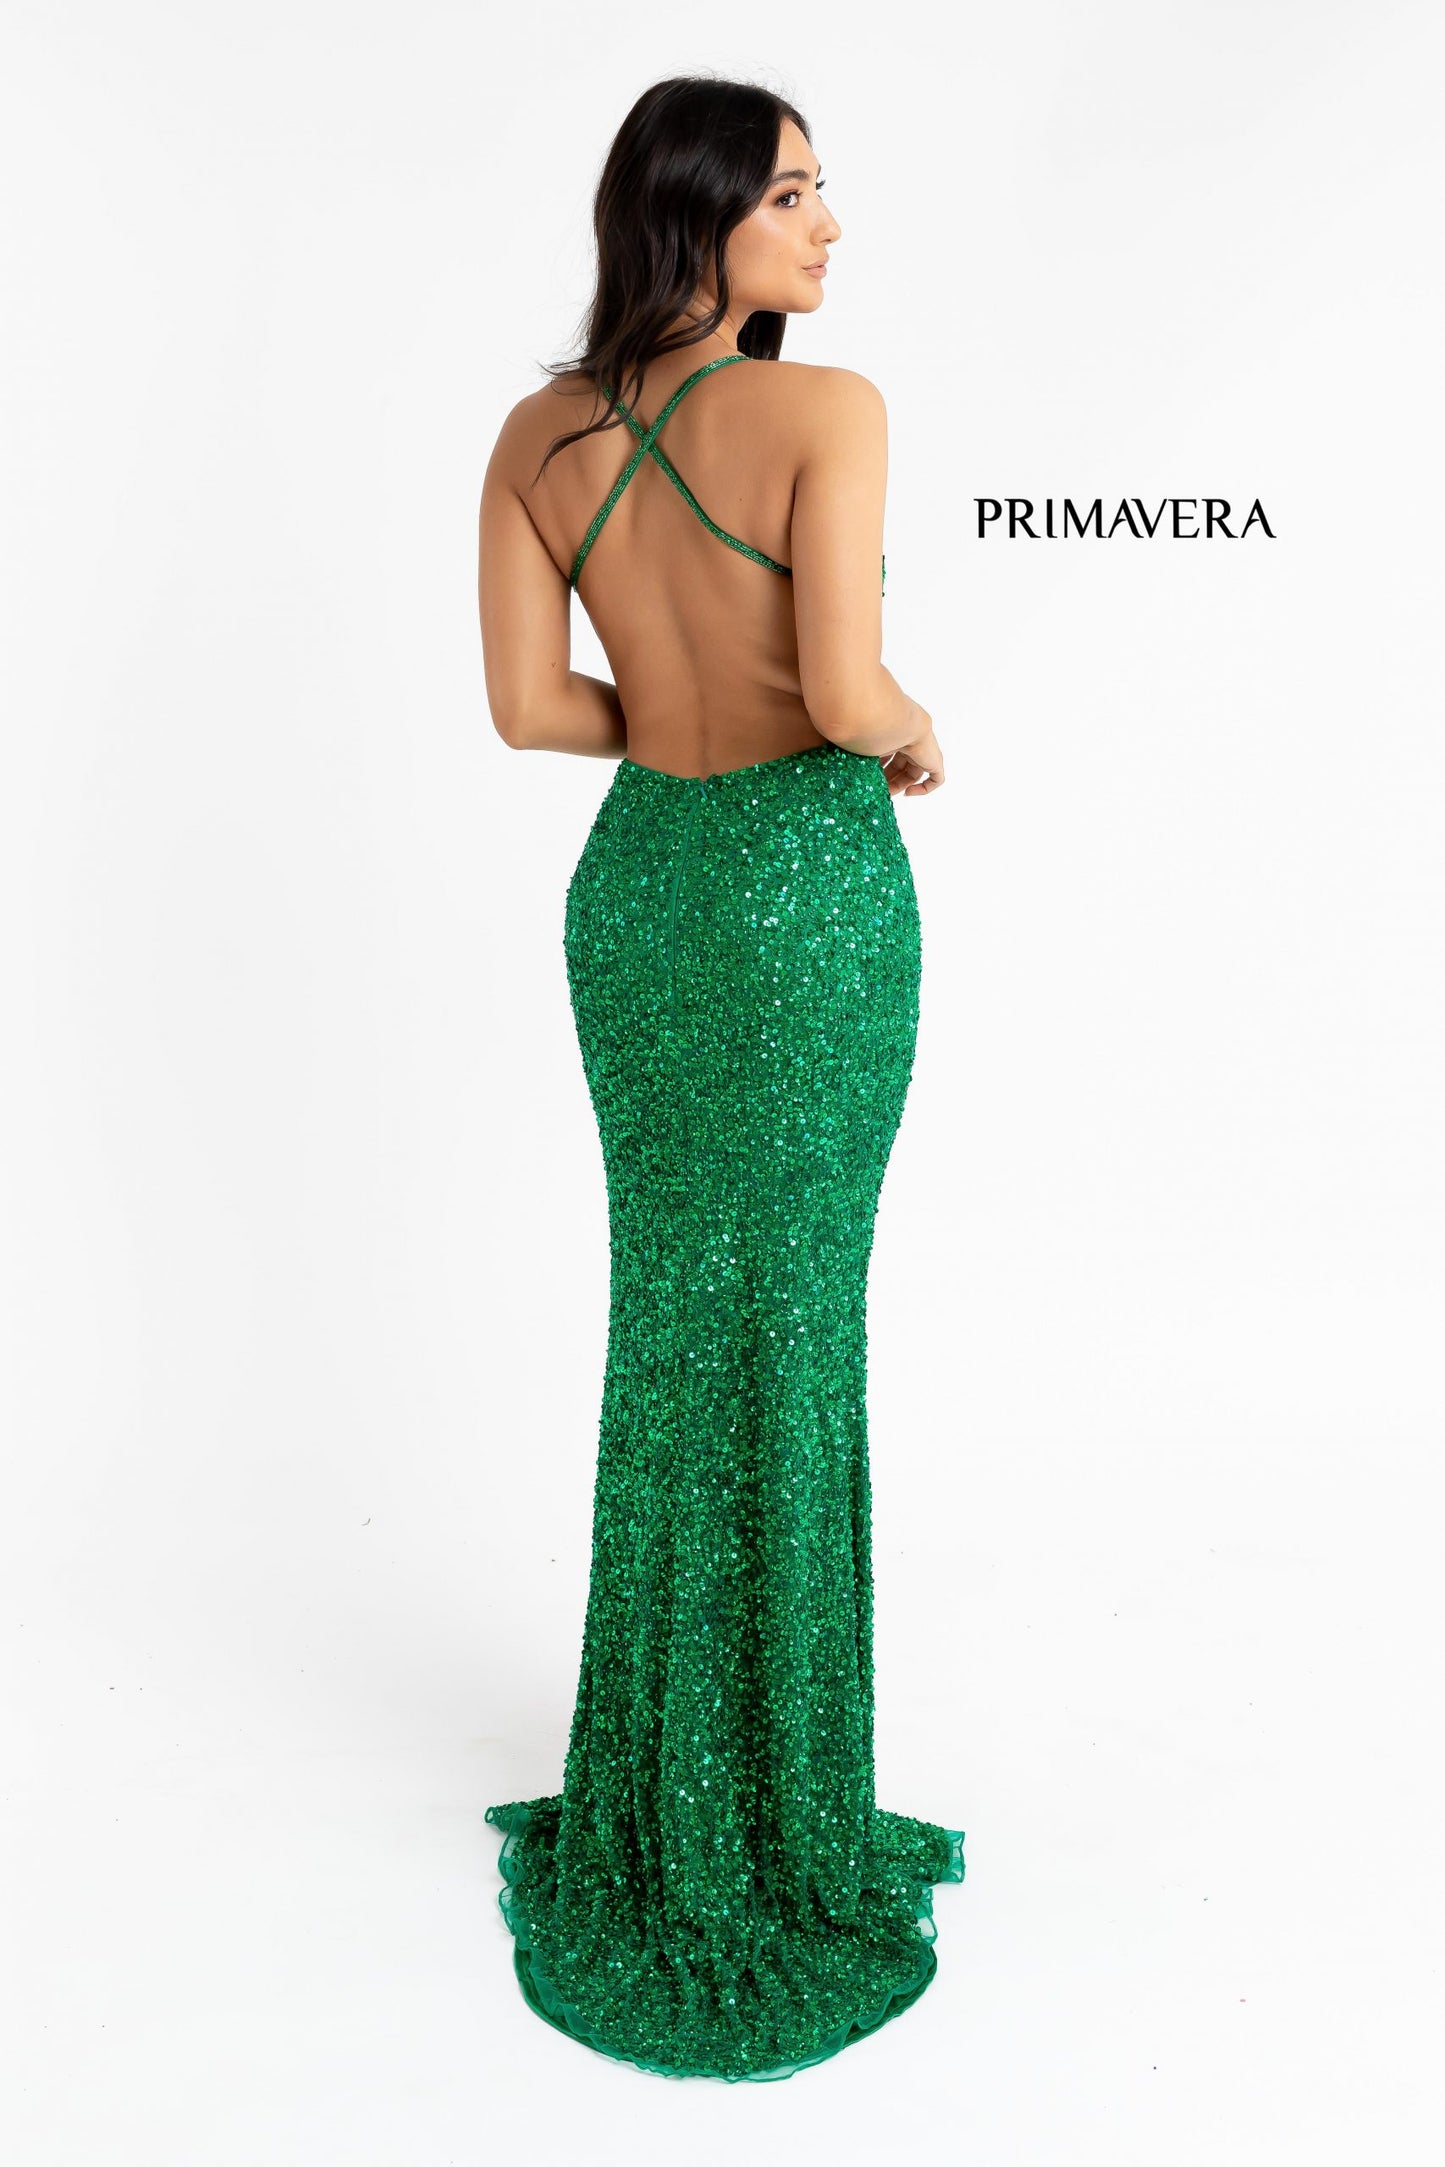 Primavera Couture 3291 Exclusive Prom Dresses.  This long prom dress is embellished throughout with shimmering sequins.  This impressive gown showcases a v neckline, thin beaded straps and crisscrossed straps in the open back. The long slim skirt has a sultry high side front slit. 